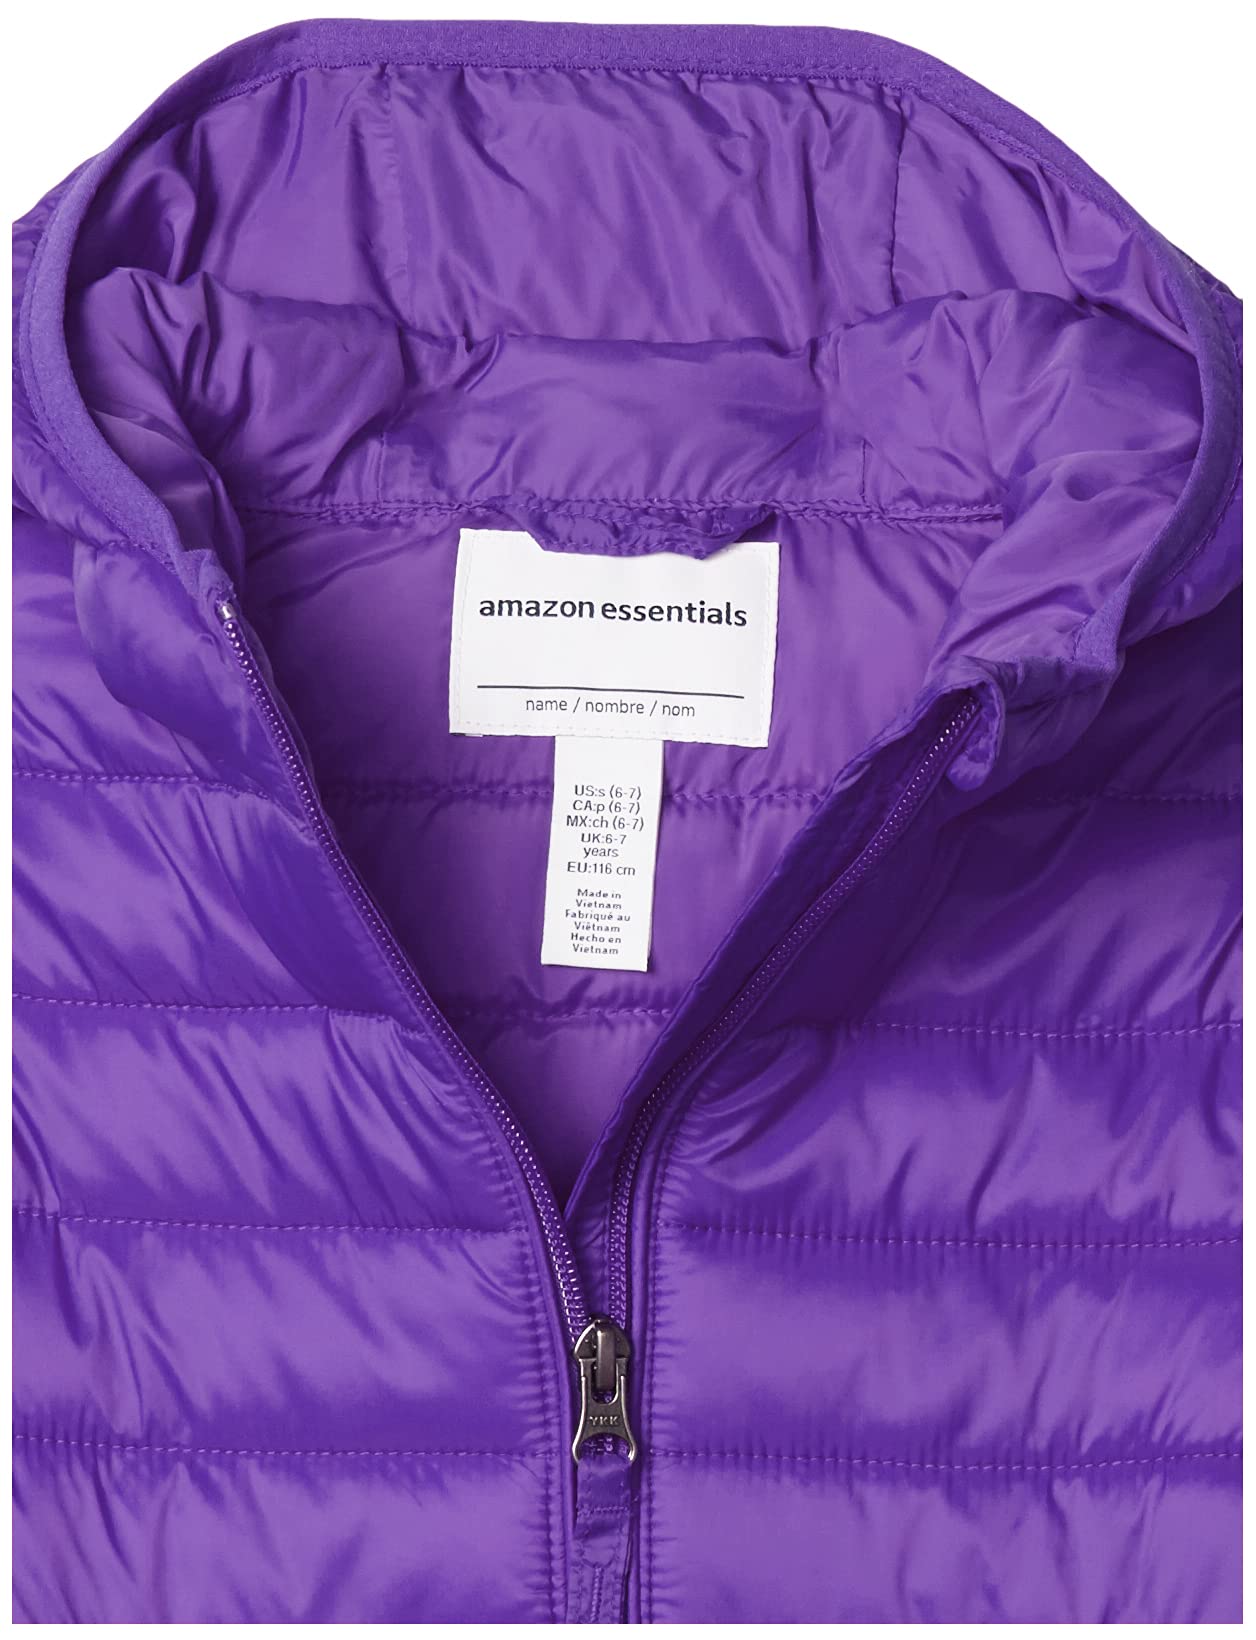 Amazon Essentials Girls and Toddlers' Lightweight Water-Resistant Packable Hooded Puffer Jacket